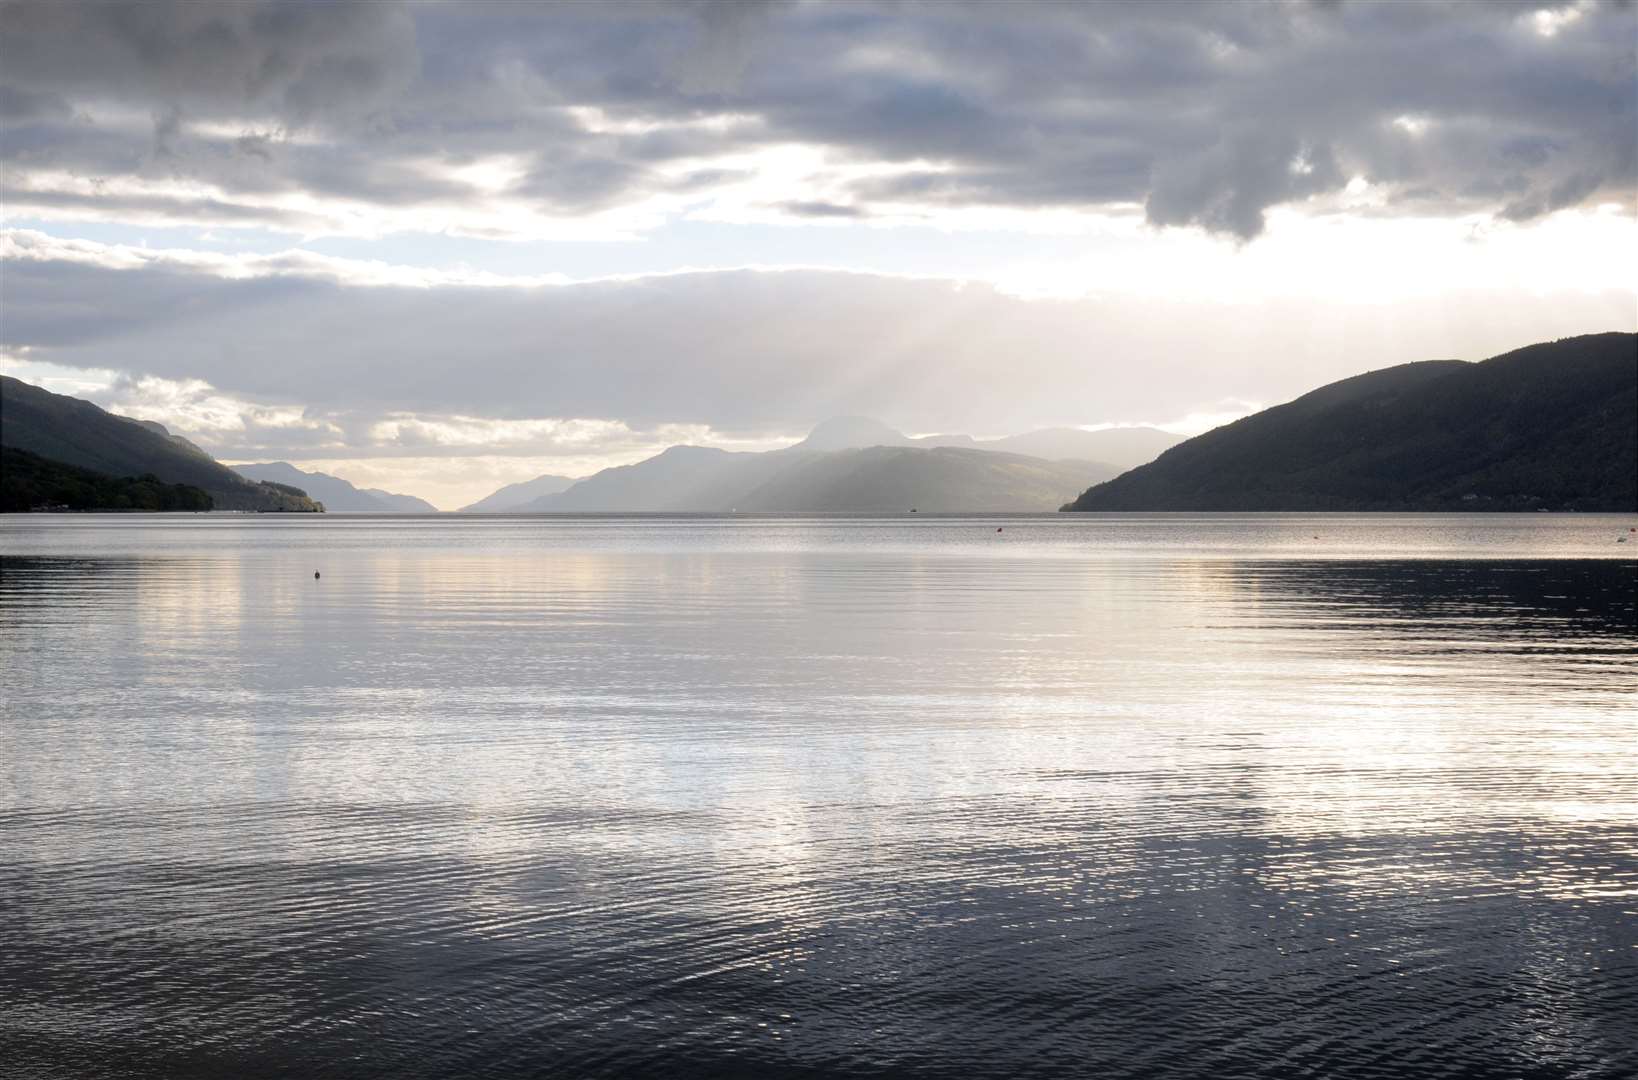 Loch Ness and the elusive monster remain a fascination for visitors.